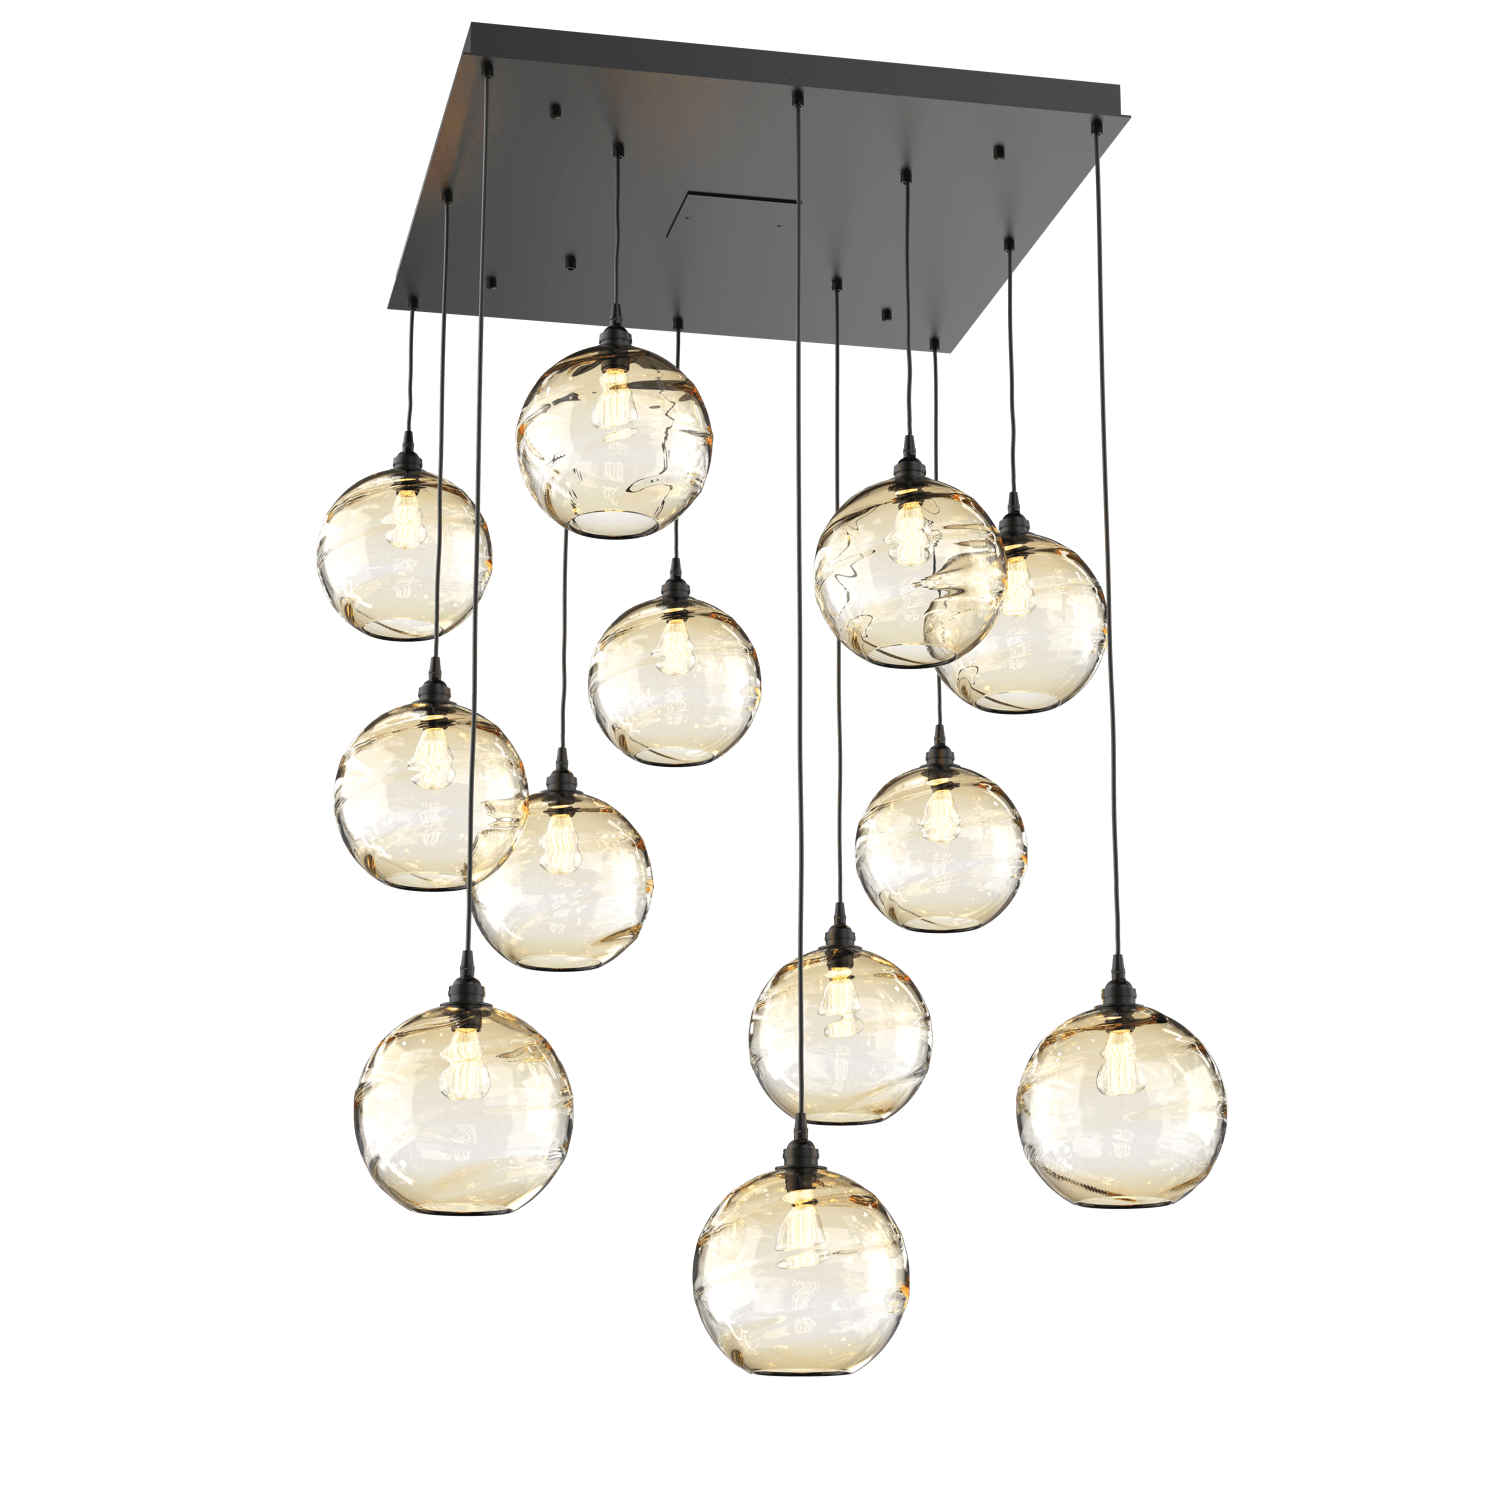 CHB0047-12-MB-OA-Hammerton-Studio-Optic-Blown-Glass-Terra-12-light-square-pendant-chandelier-with-matte-black-finish-and-optic-amber-blown-glass-shades-and-incandescent-lamping